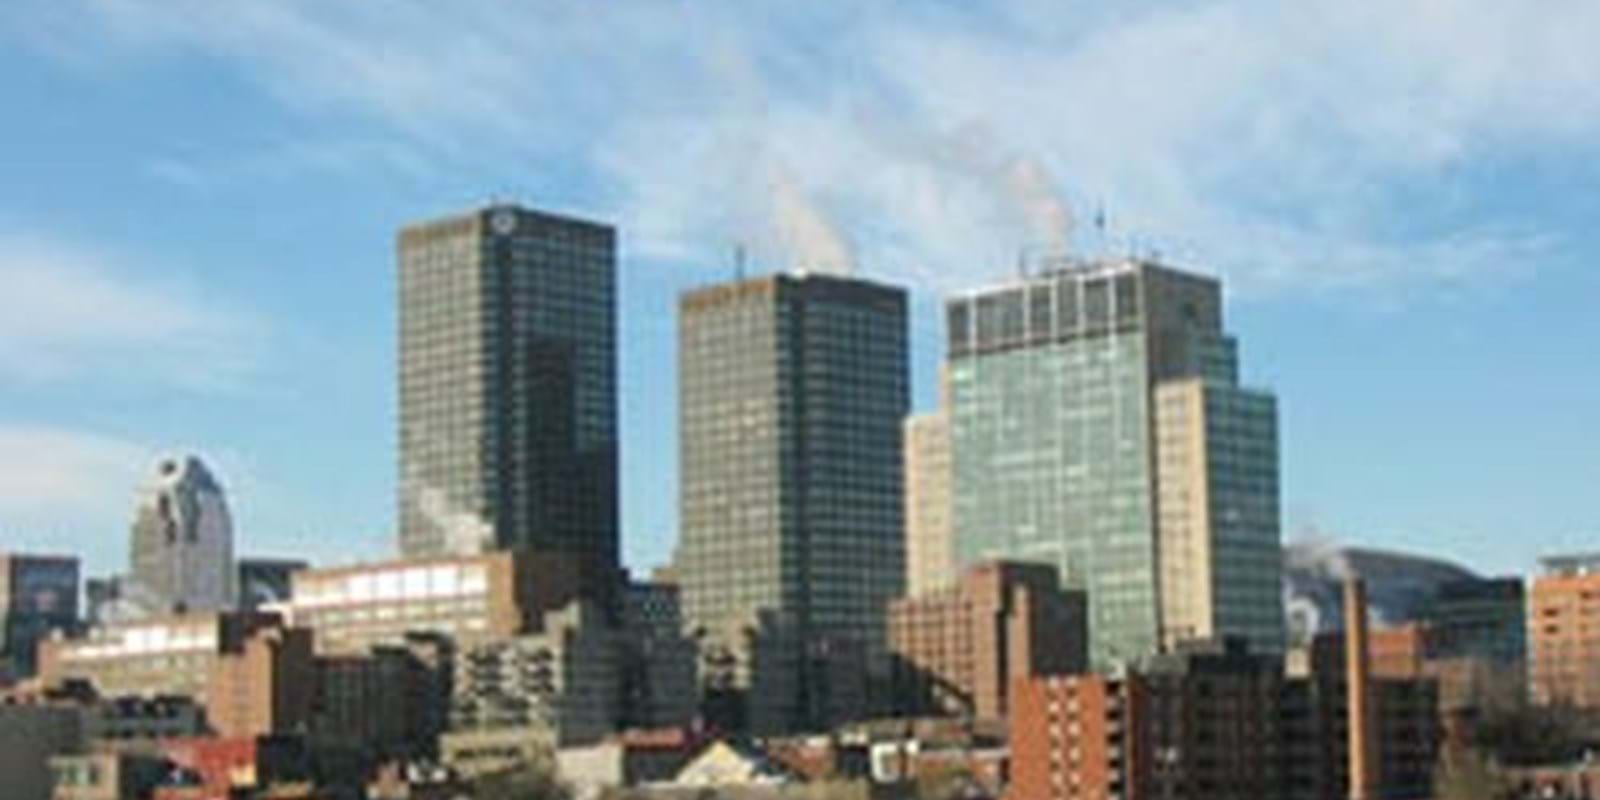 The City of Montreal forbids the installation of solid combustible appliances on its territory